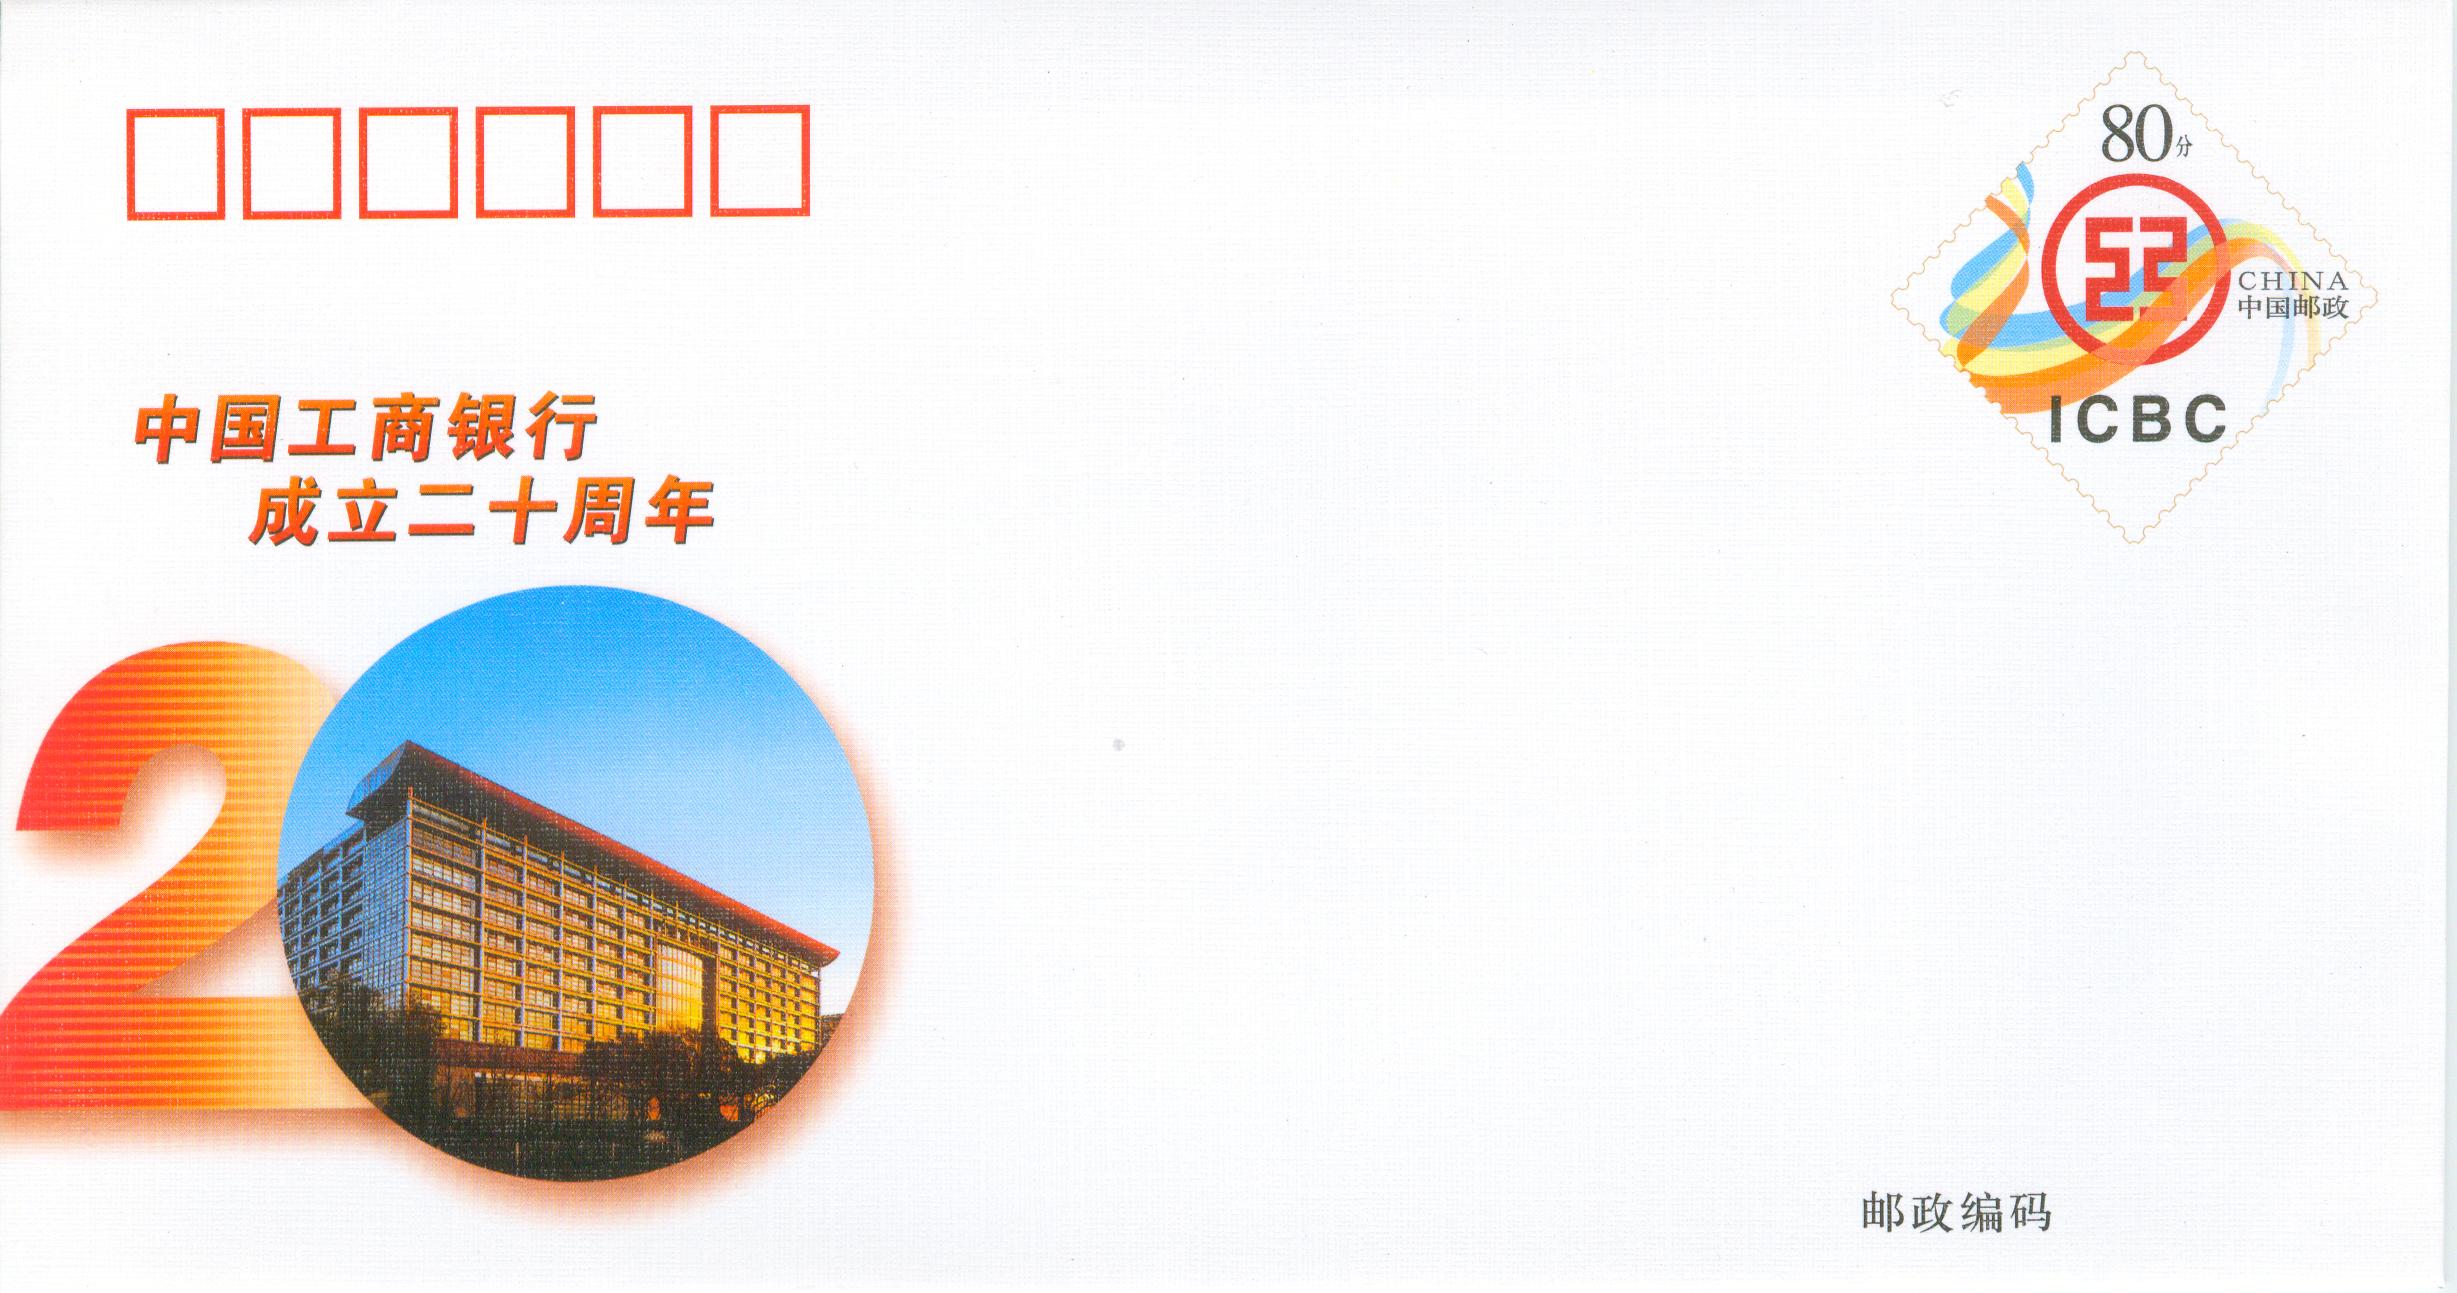 JF73 The 20th Annversary of Industrial and Commercial Bank of China 2004